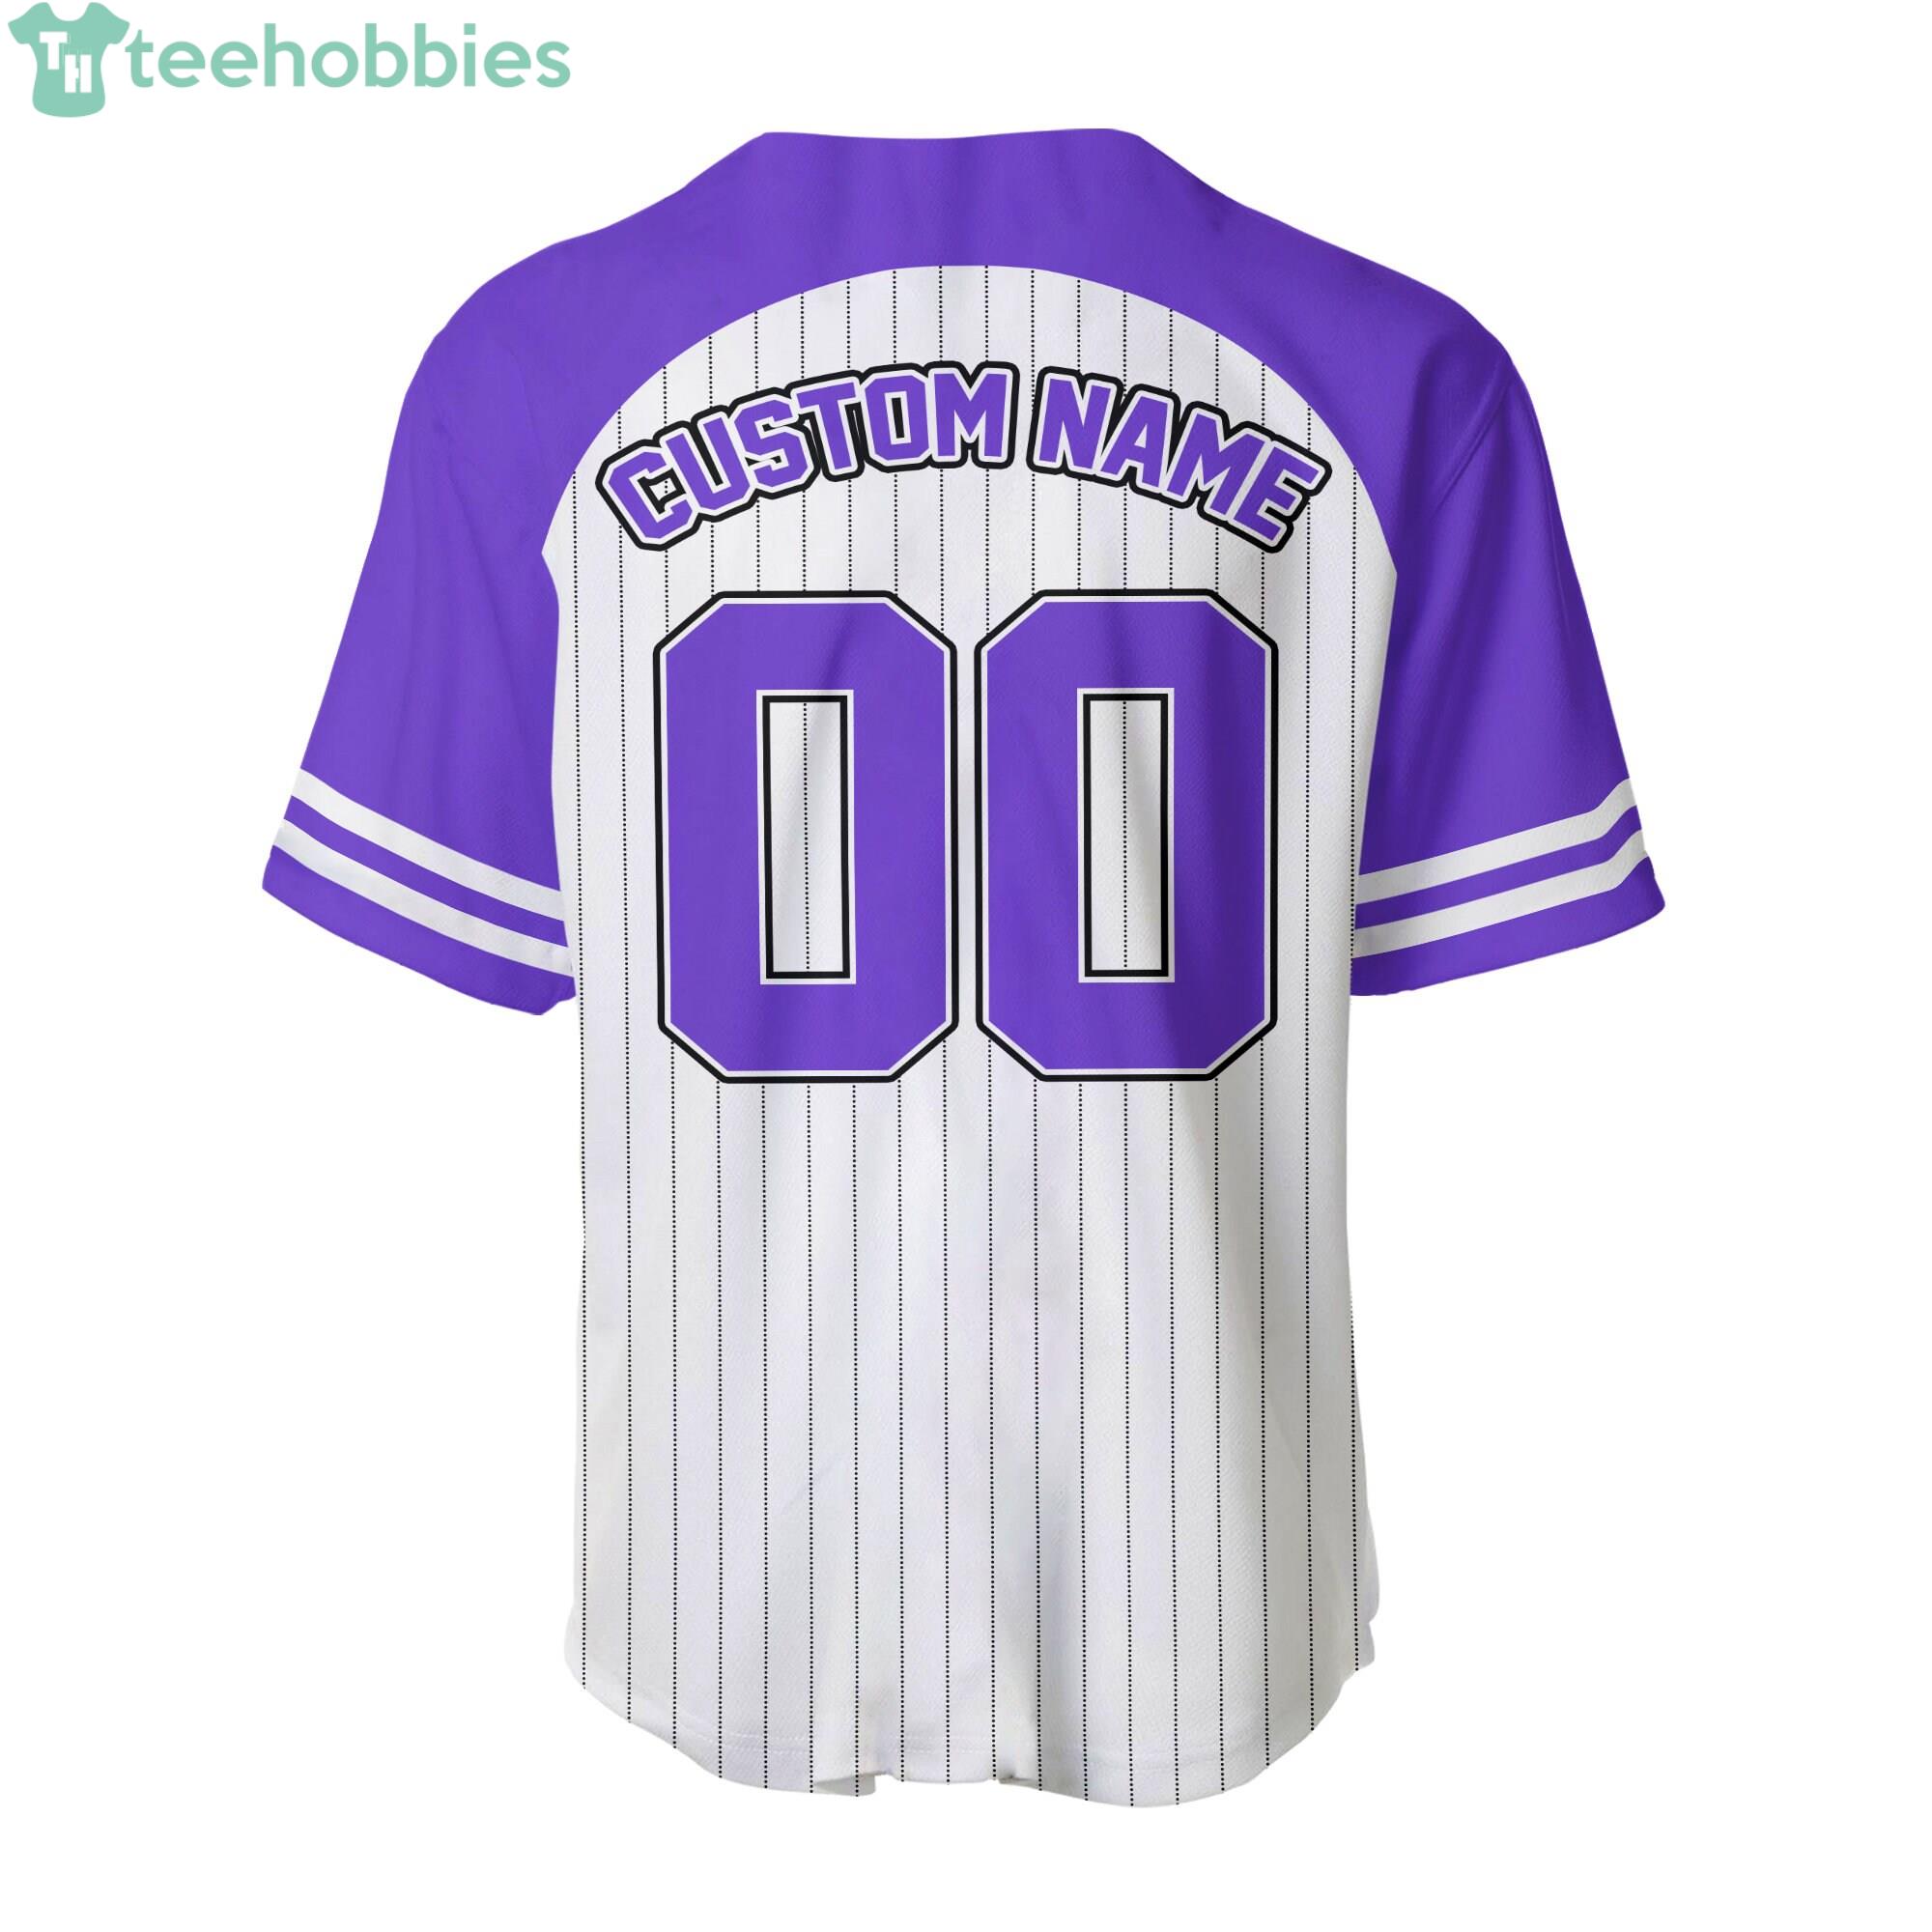 Purple baseball tops with scales in letters, numbers